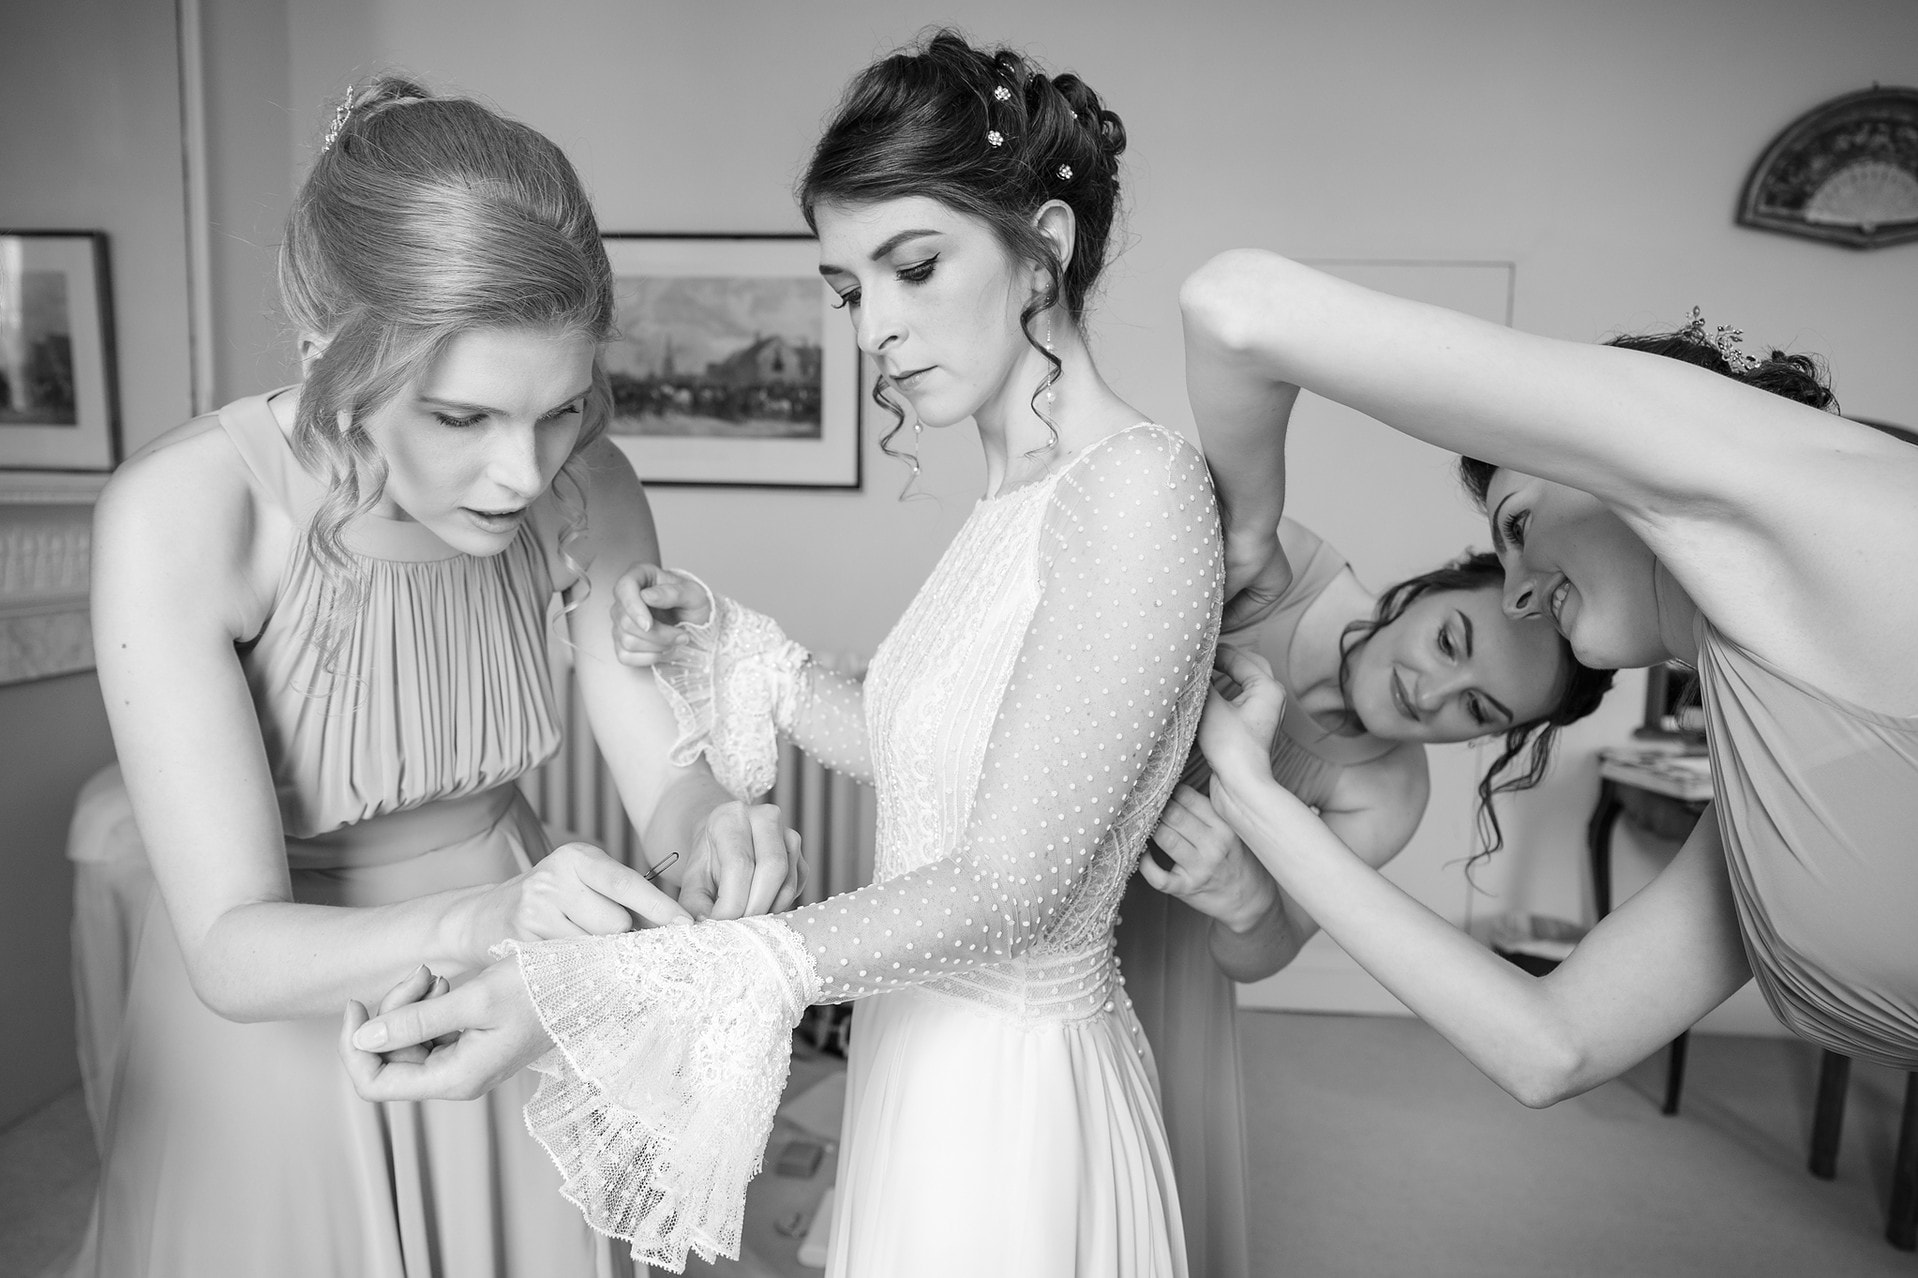 One bridesmaid doing up buttons on bride's sleeve while two other bridesmaids do up the buttons on the back of her dress